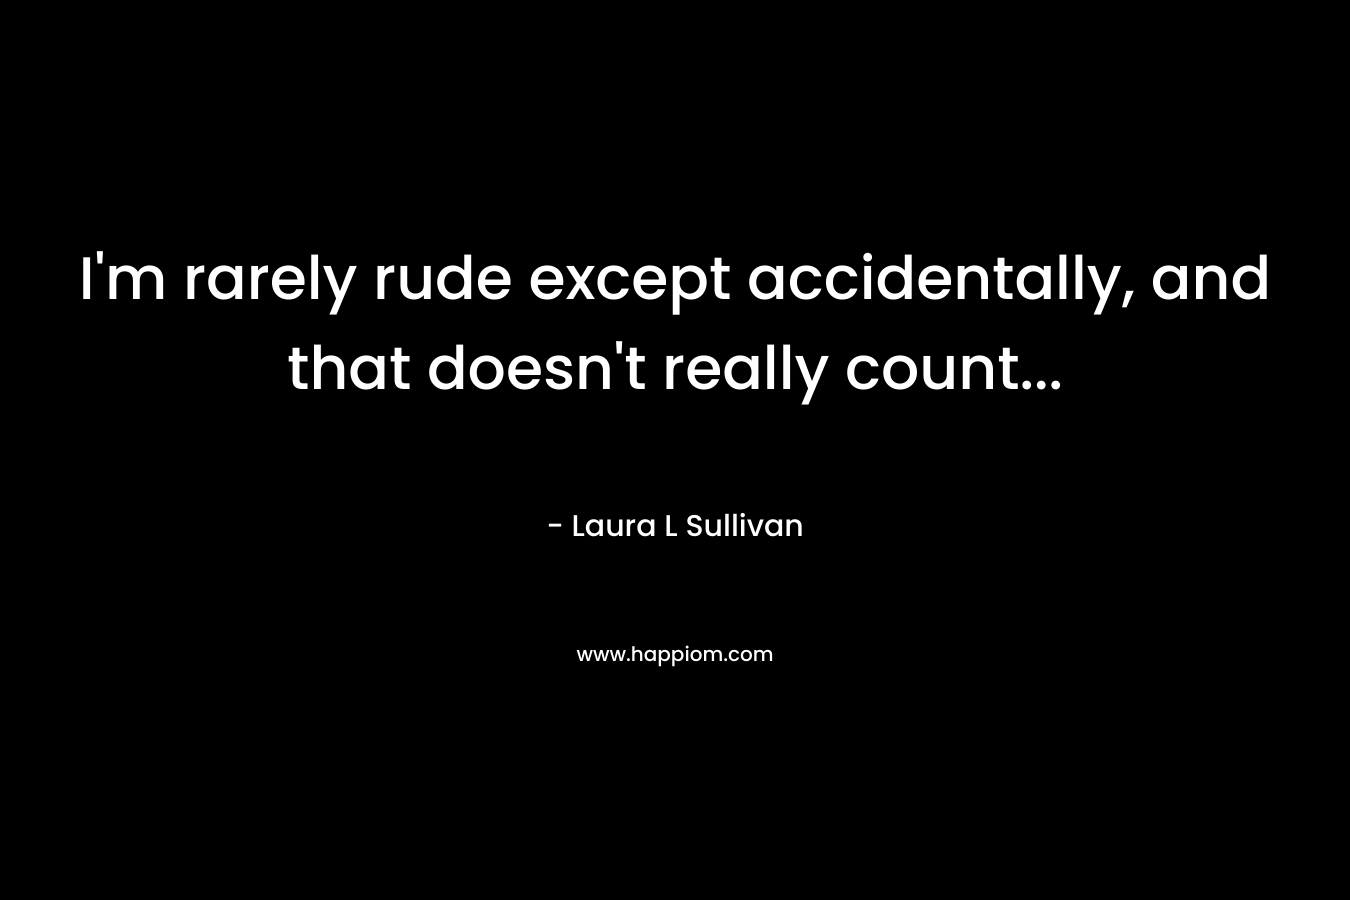 I'm rarely rude except accidentally, and that doesn't really count...